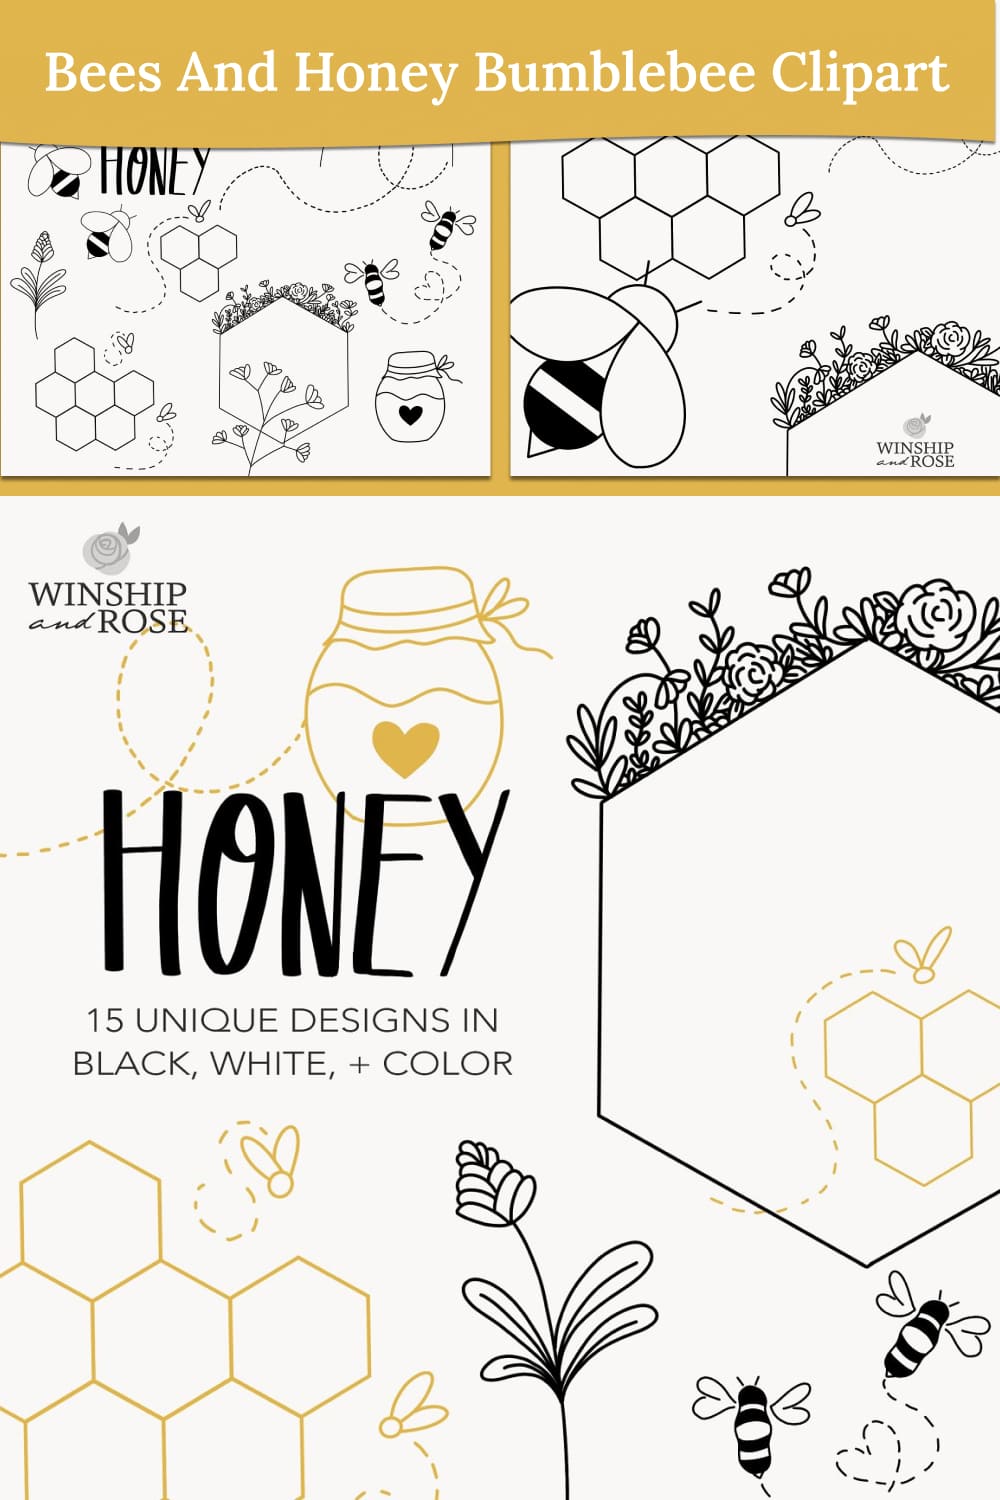 Bees and honey bumblebee clip art - pinterest image preview.